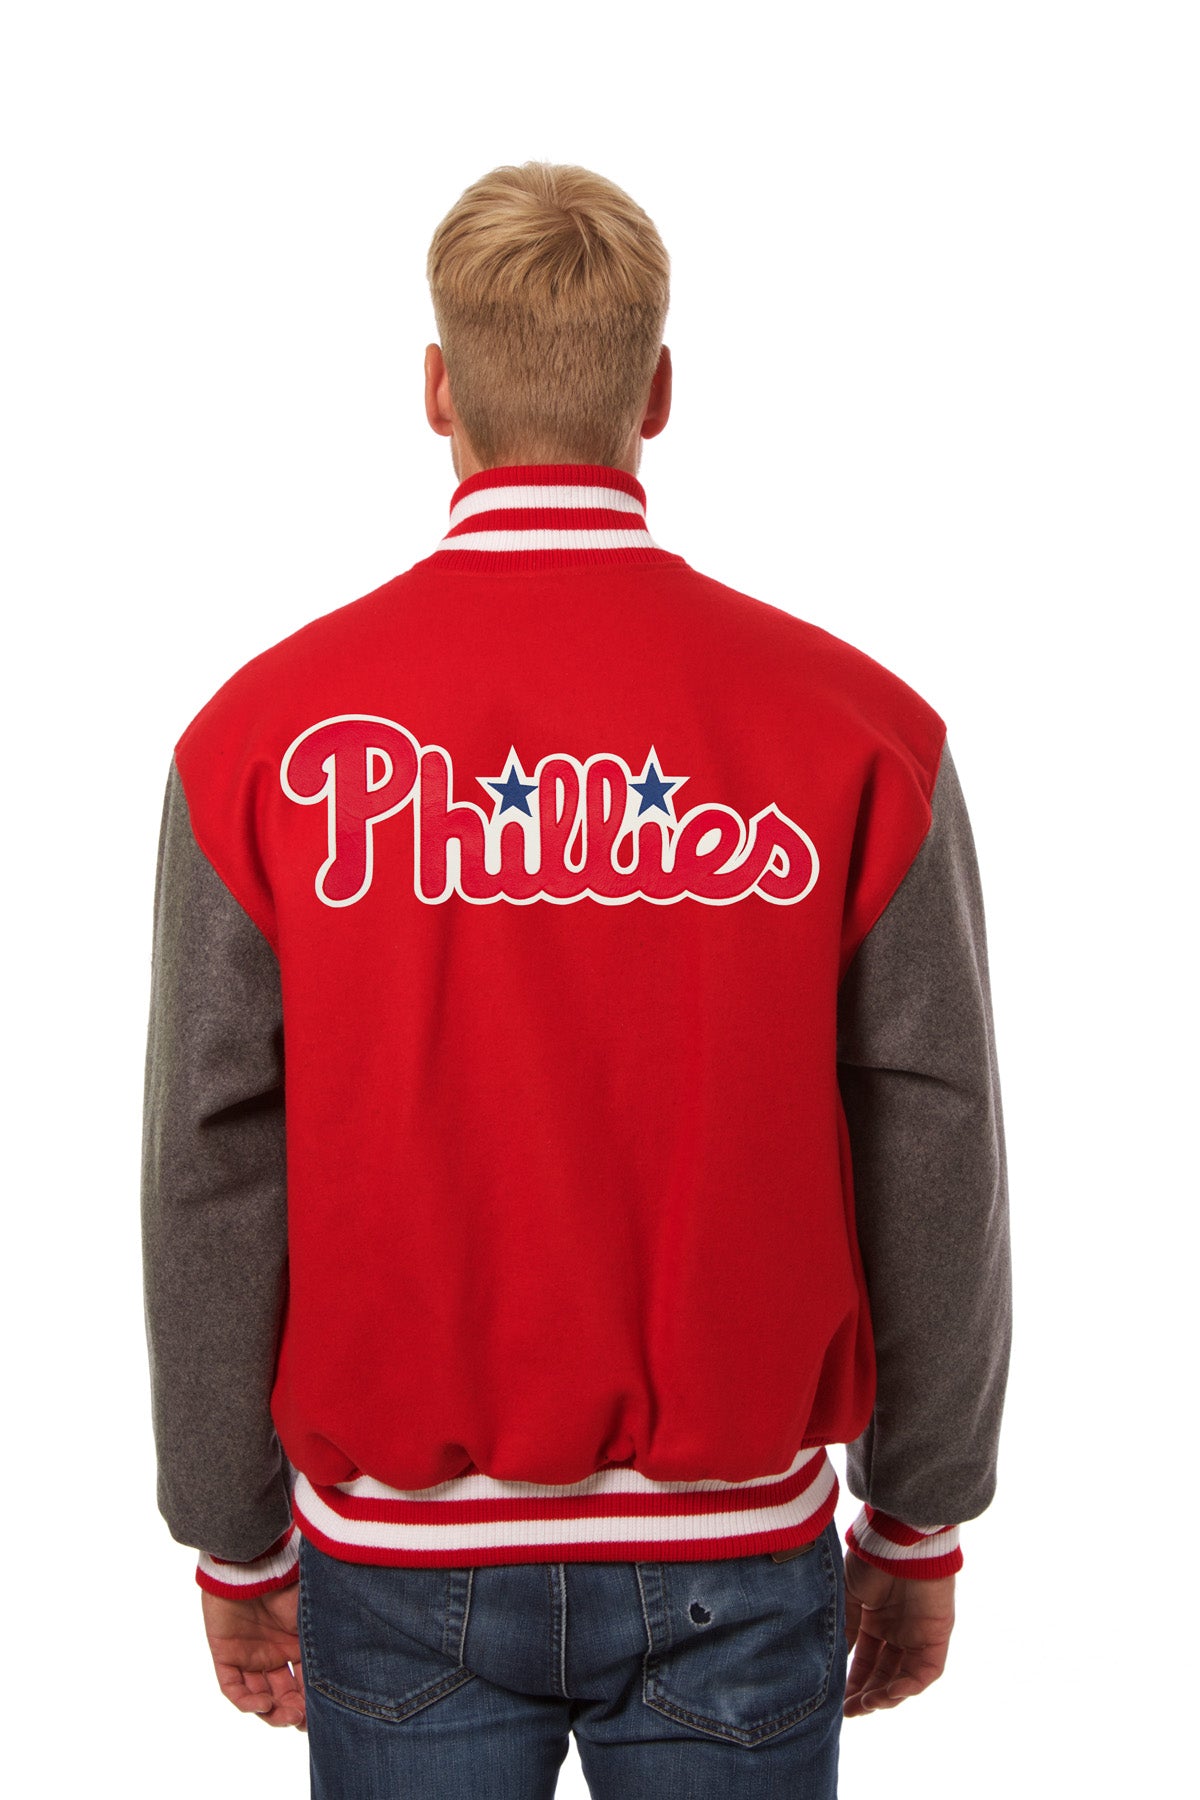 Philadelphia Phillies Two-Tone Wool Jacket w/ Handcrafted Leather Logos - Red/Gray 3X-Large